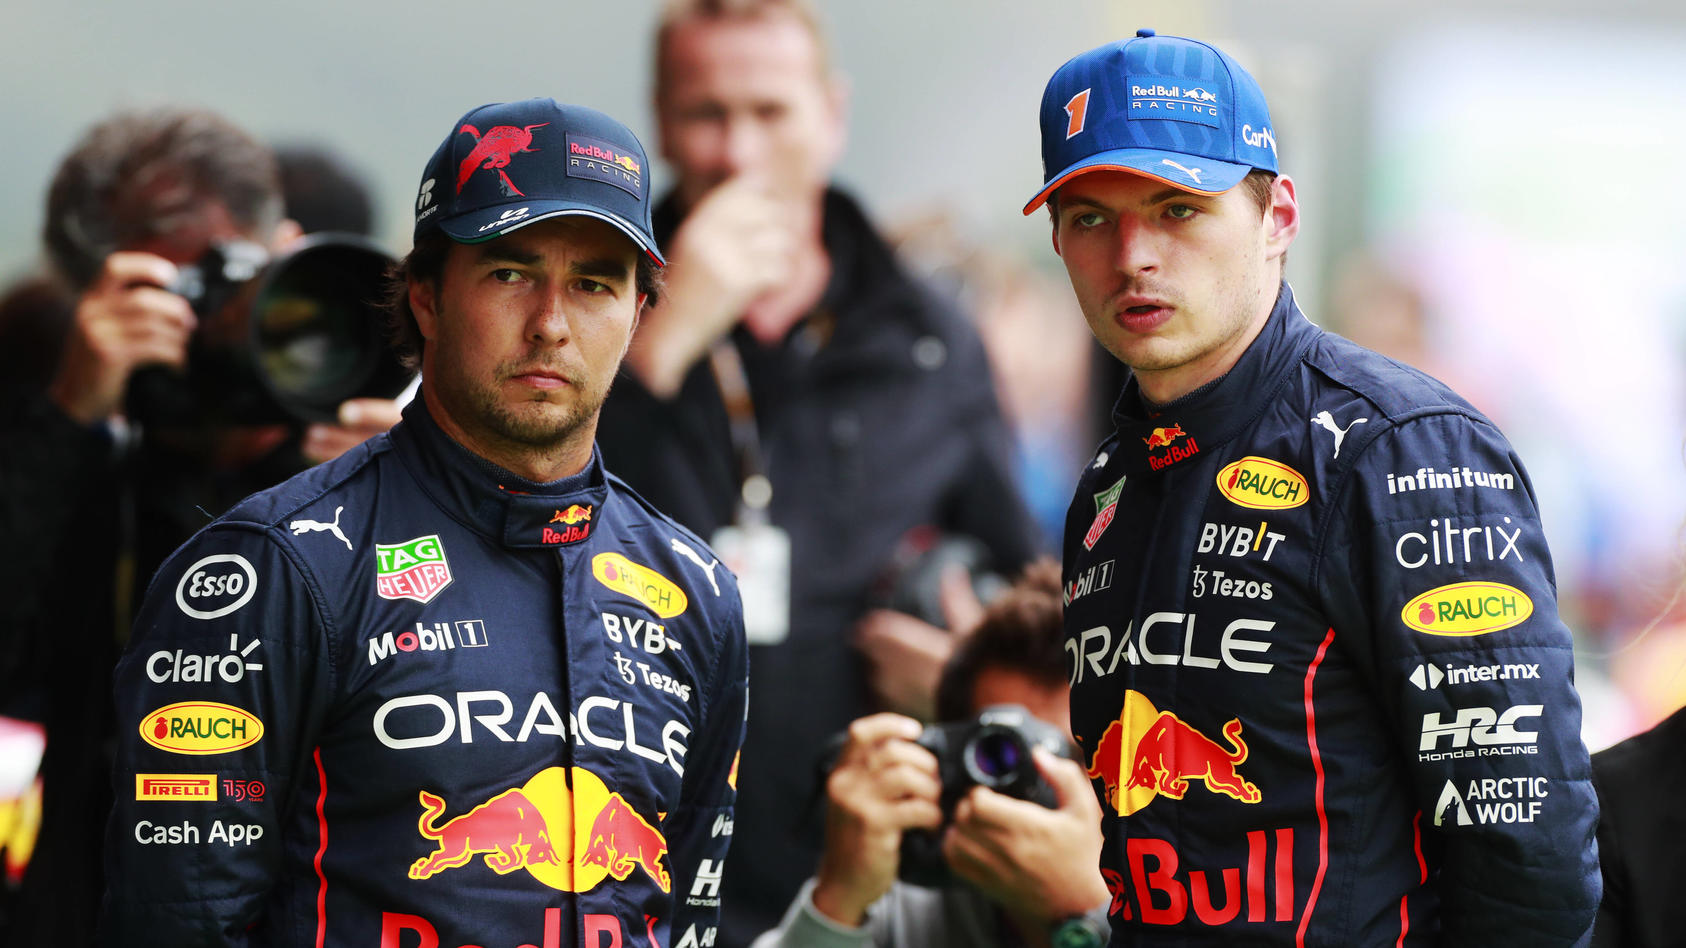  Formula 1 2022: Belgian GP CIRCUIT DE SPA FRANCORCHAMPS, BELGIUM - AUGUST 27: Sergio Perez, Red Bull Racing, and Max Verstappen, Red Bull Racing, in Parc Ferme after Qualifying during the Belgian GP at Circuit de Spa Francorchamps on Saturday August